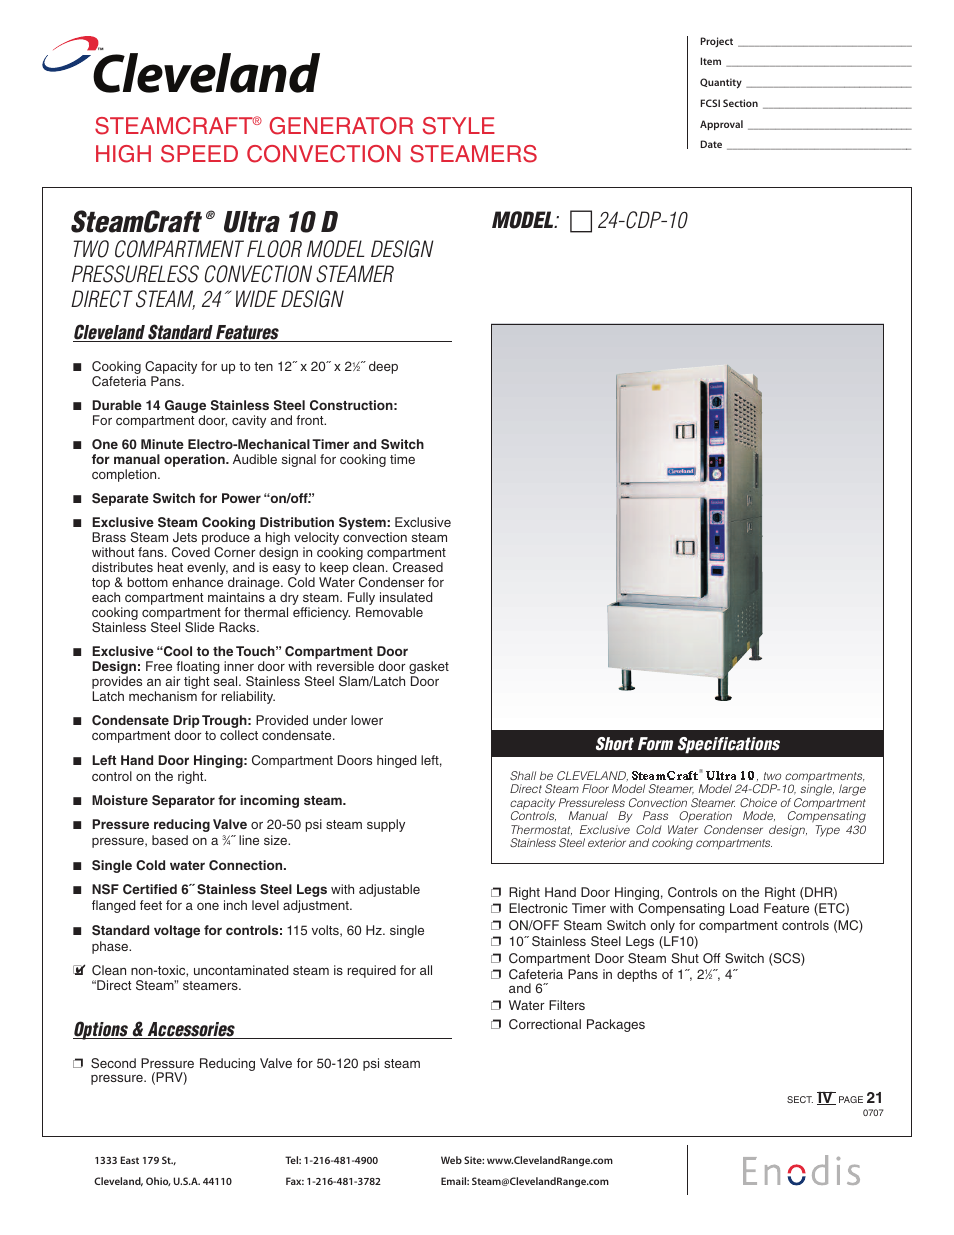 Cleveland Range SteamCraft 24-CDP-10 User Manual | 2 pages